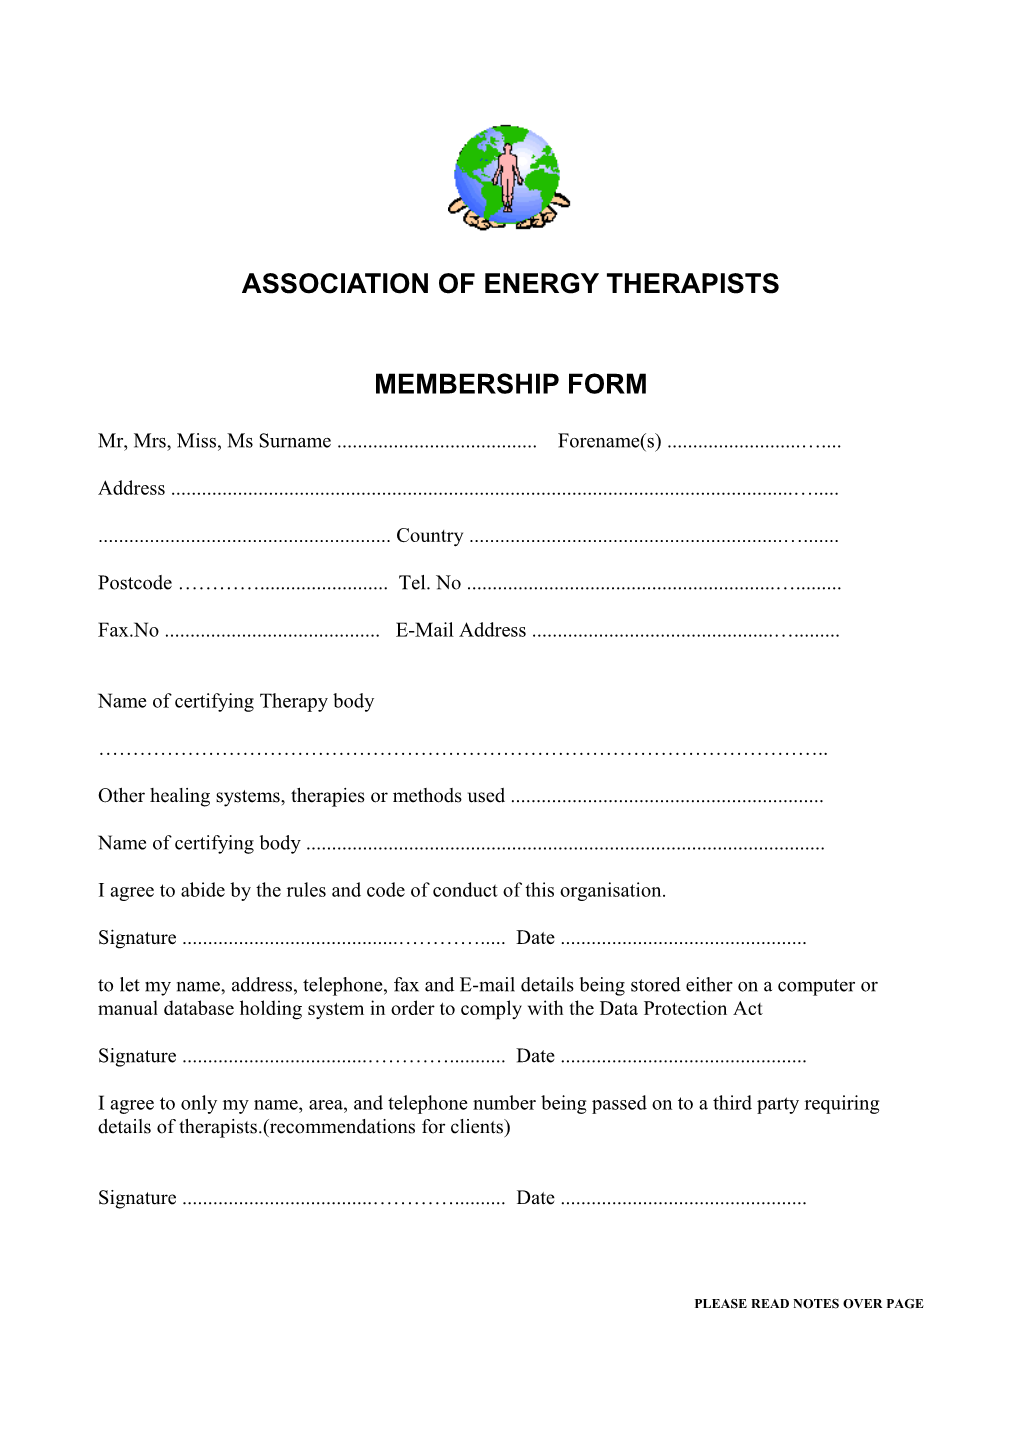 Association of Energy Therapists